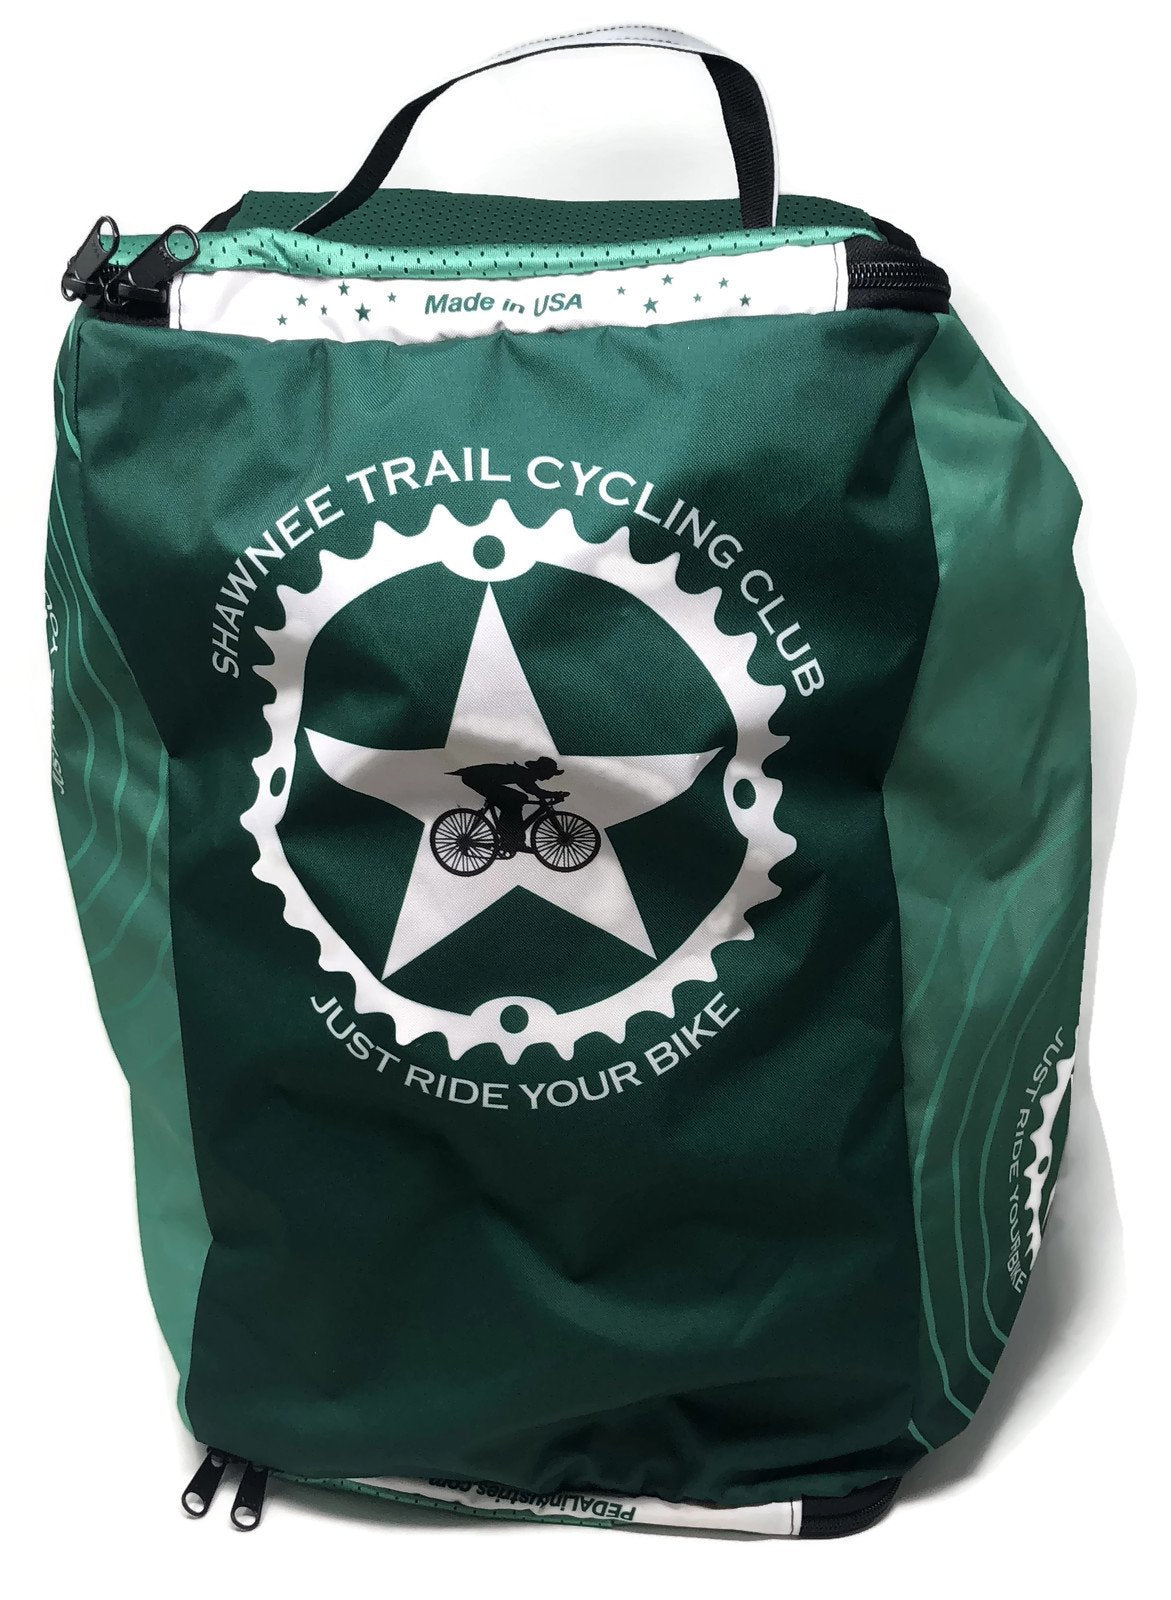 Shawnee Trail CC RACEDAY BAG - ships in about 3 weeks